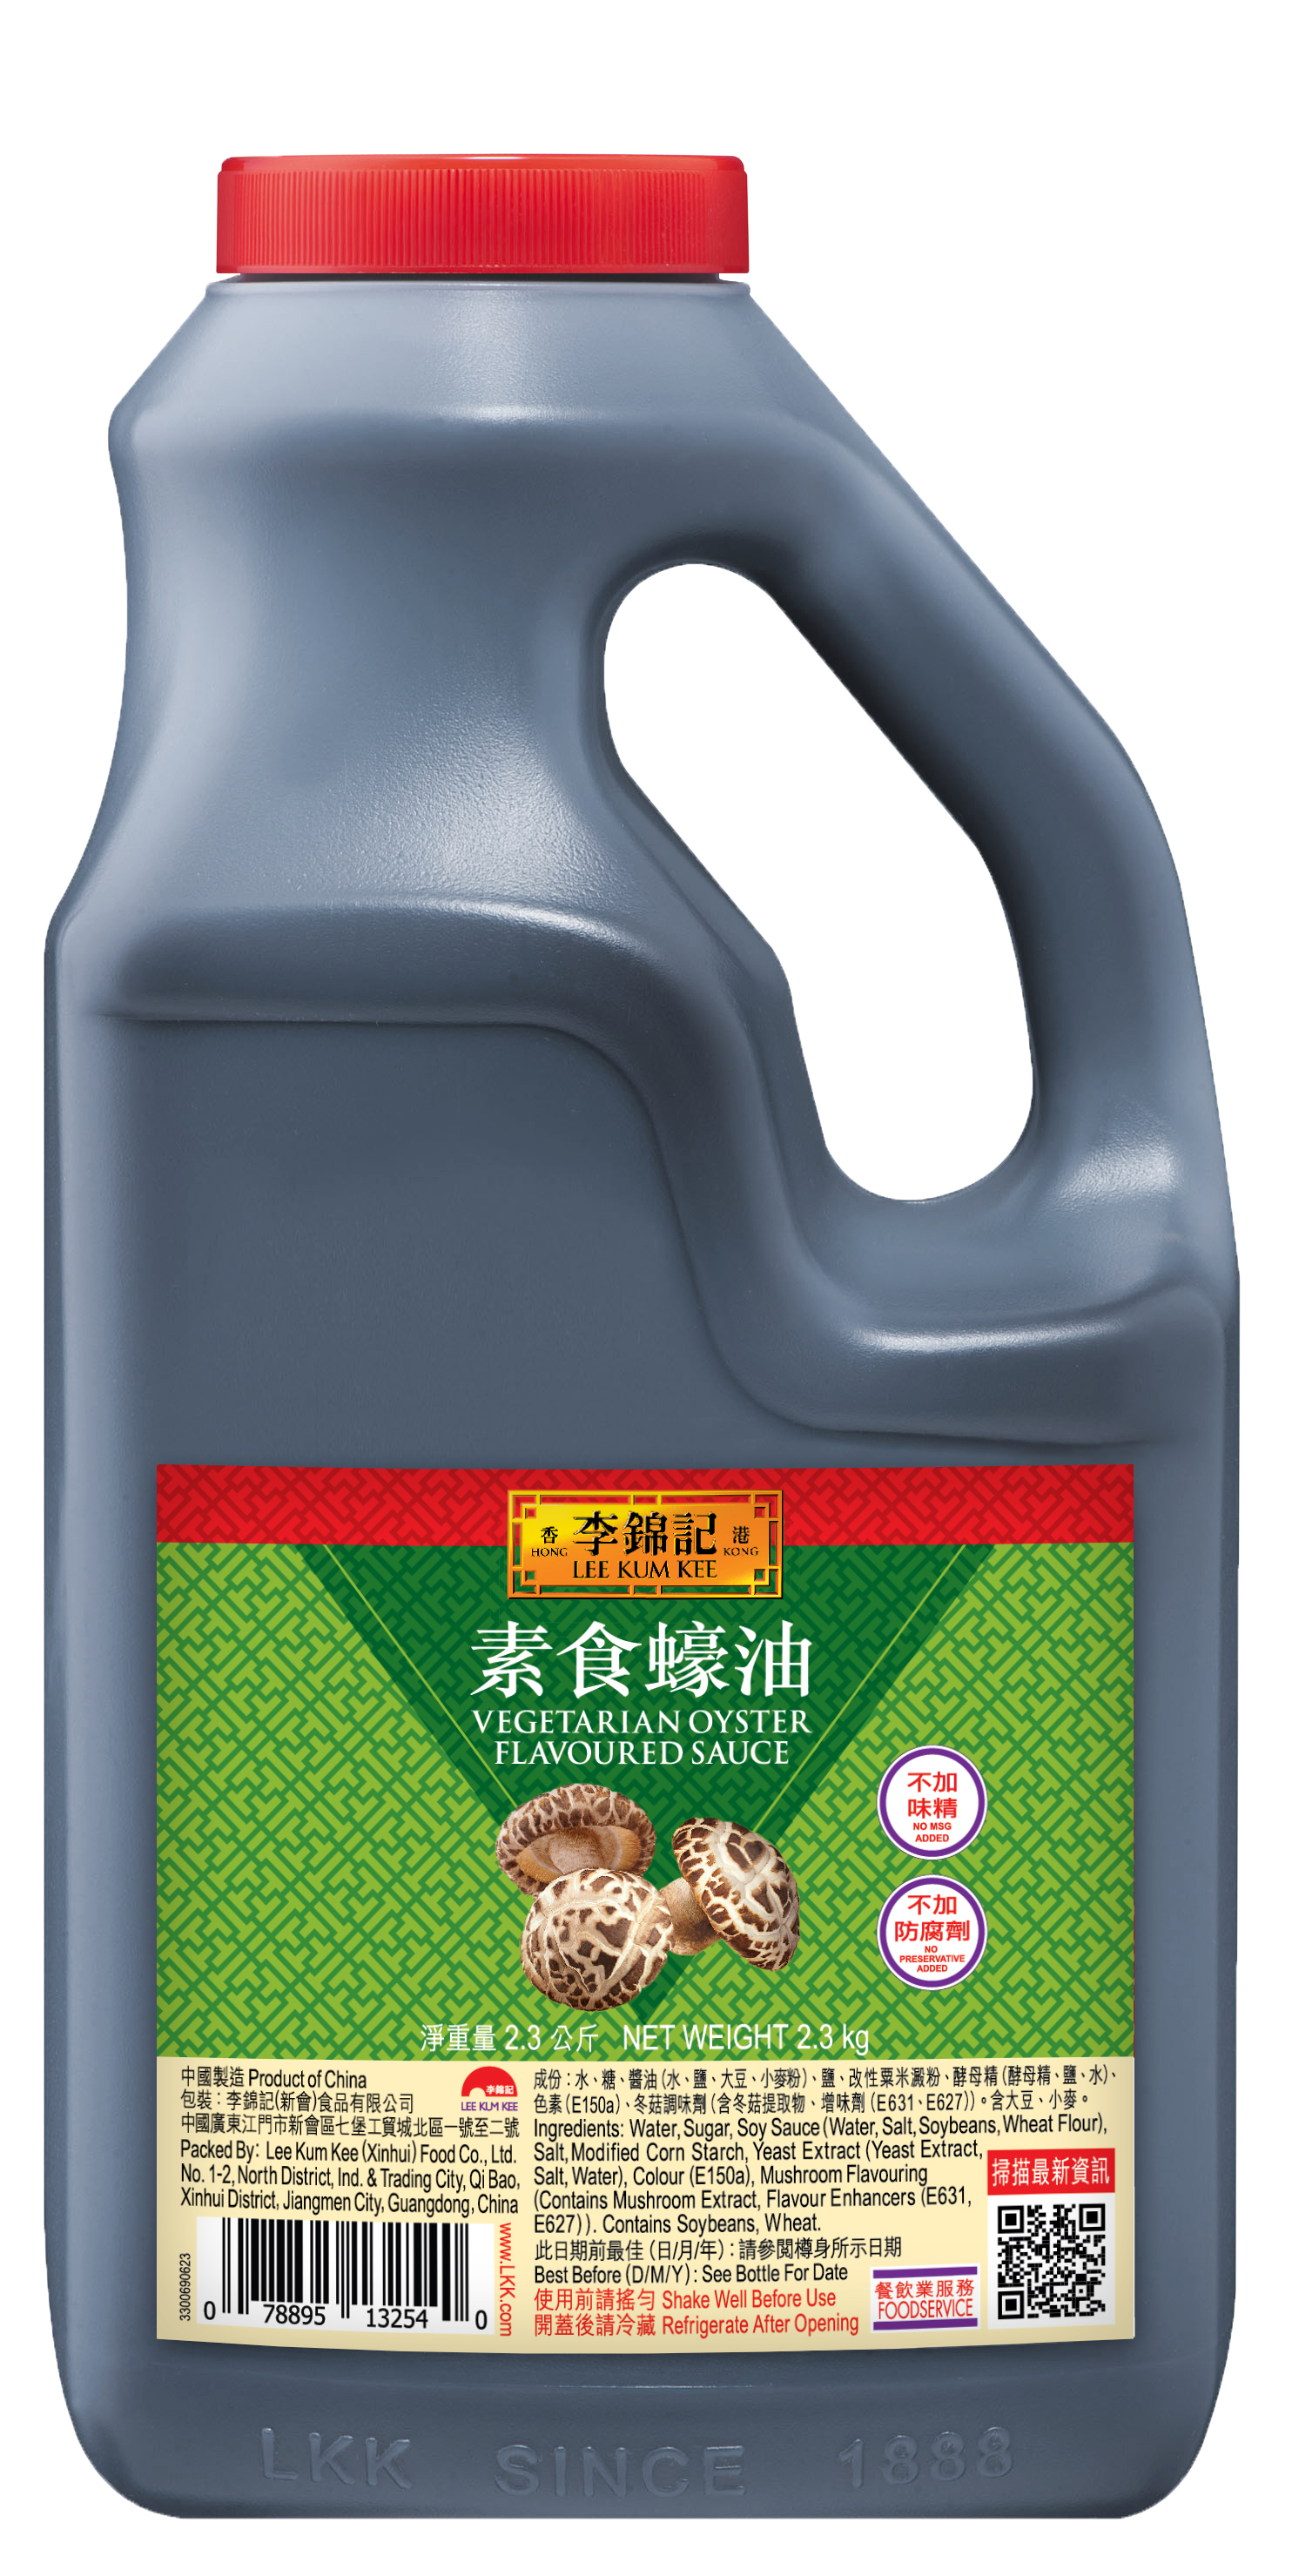 Vegetarian Oyster Flavoured Sauce